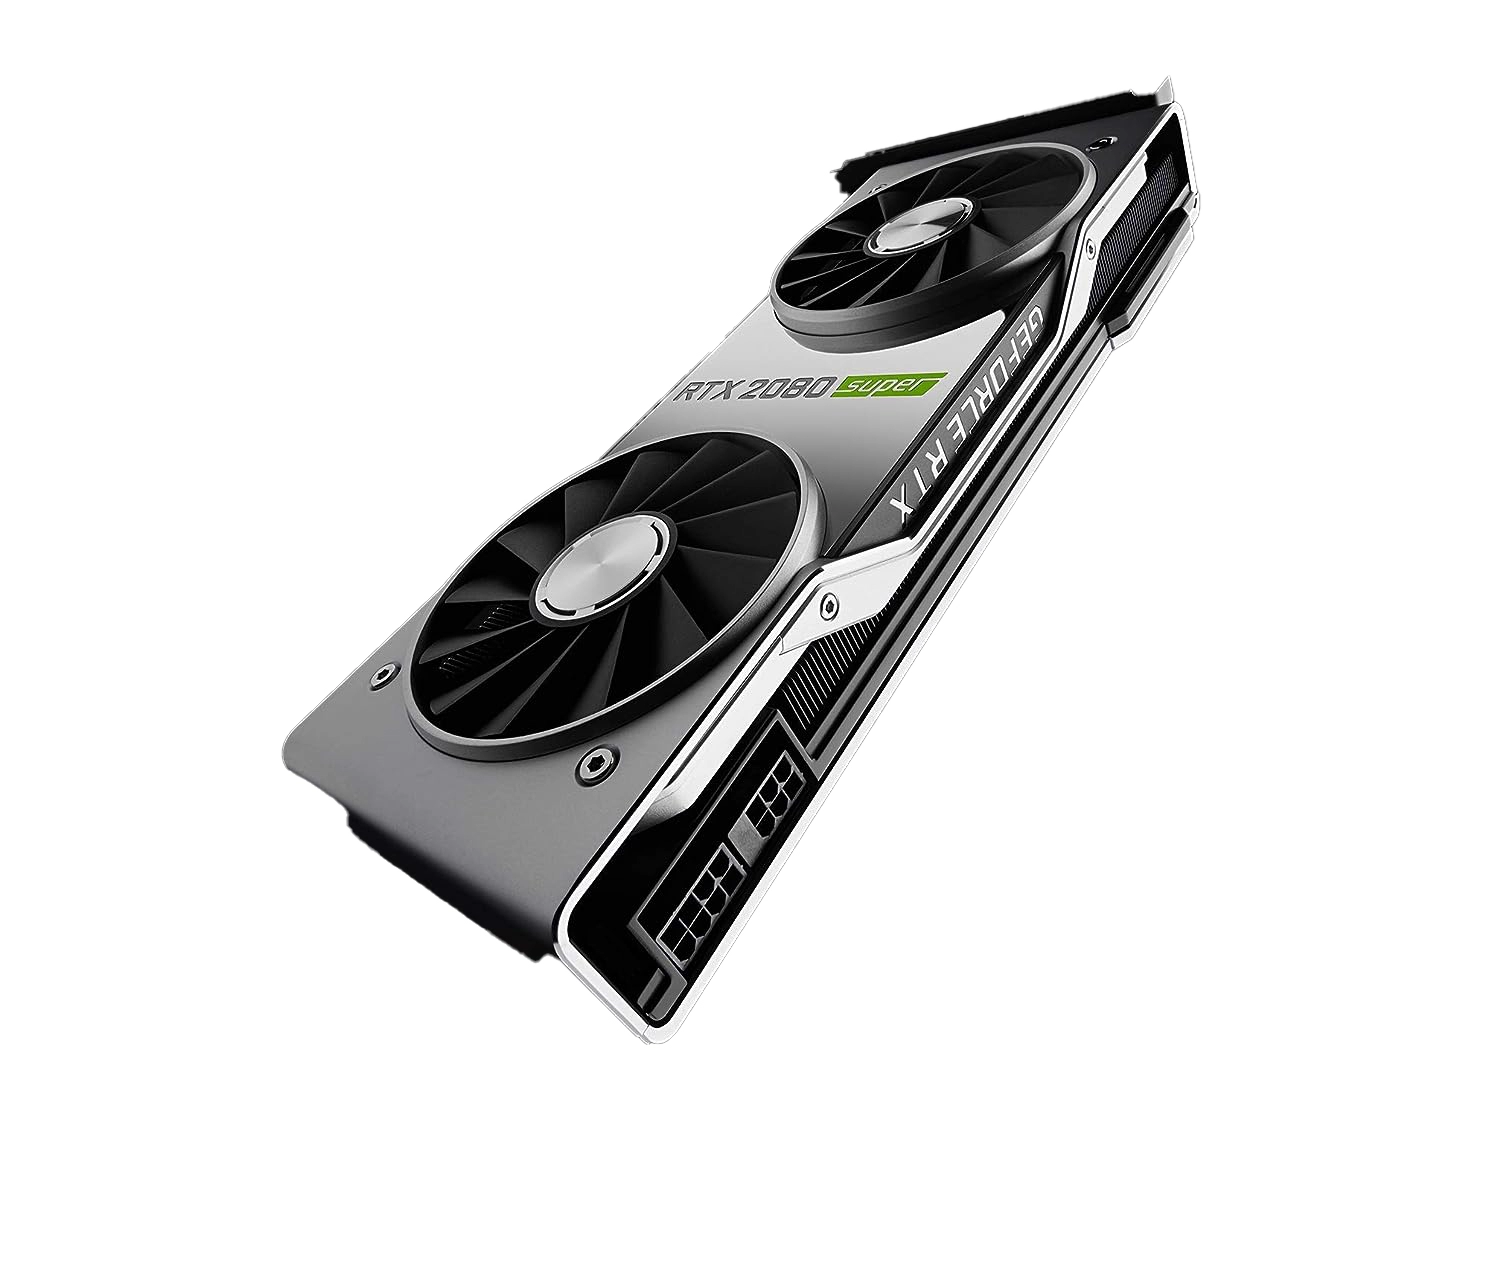 Nvidia GeForce RTX 2080 Super Founders Edition Front View